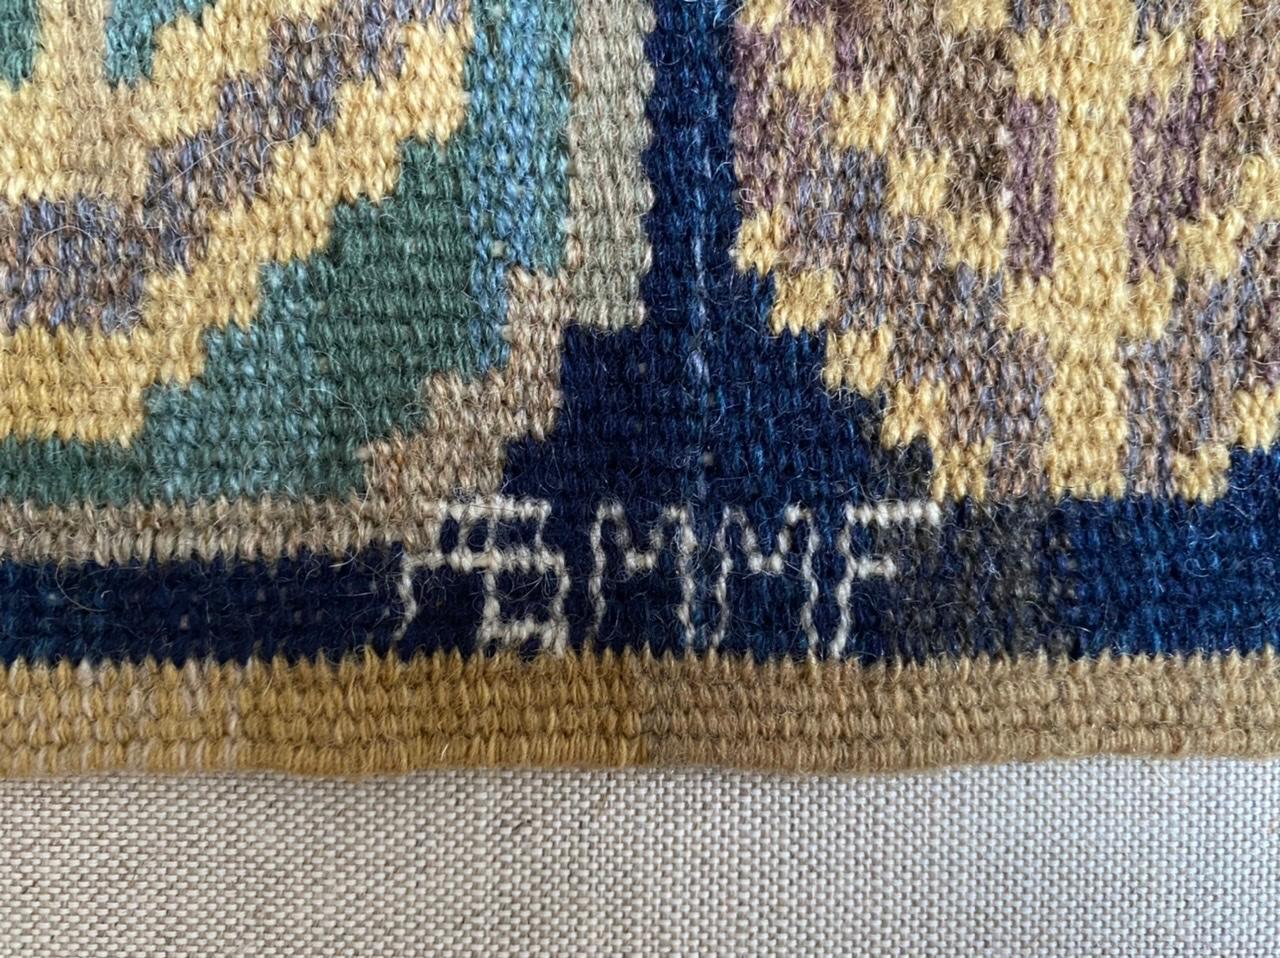 Handwoven wool wall tapestry mounted on linen

Designed by Märta Måås Fjetterström in 1926 and produced by her studio after 1941

Signed AB MMF.